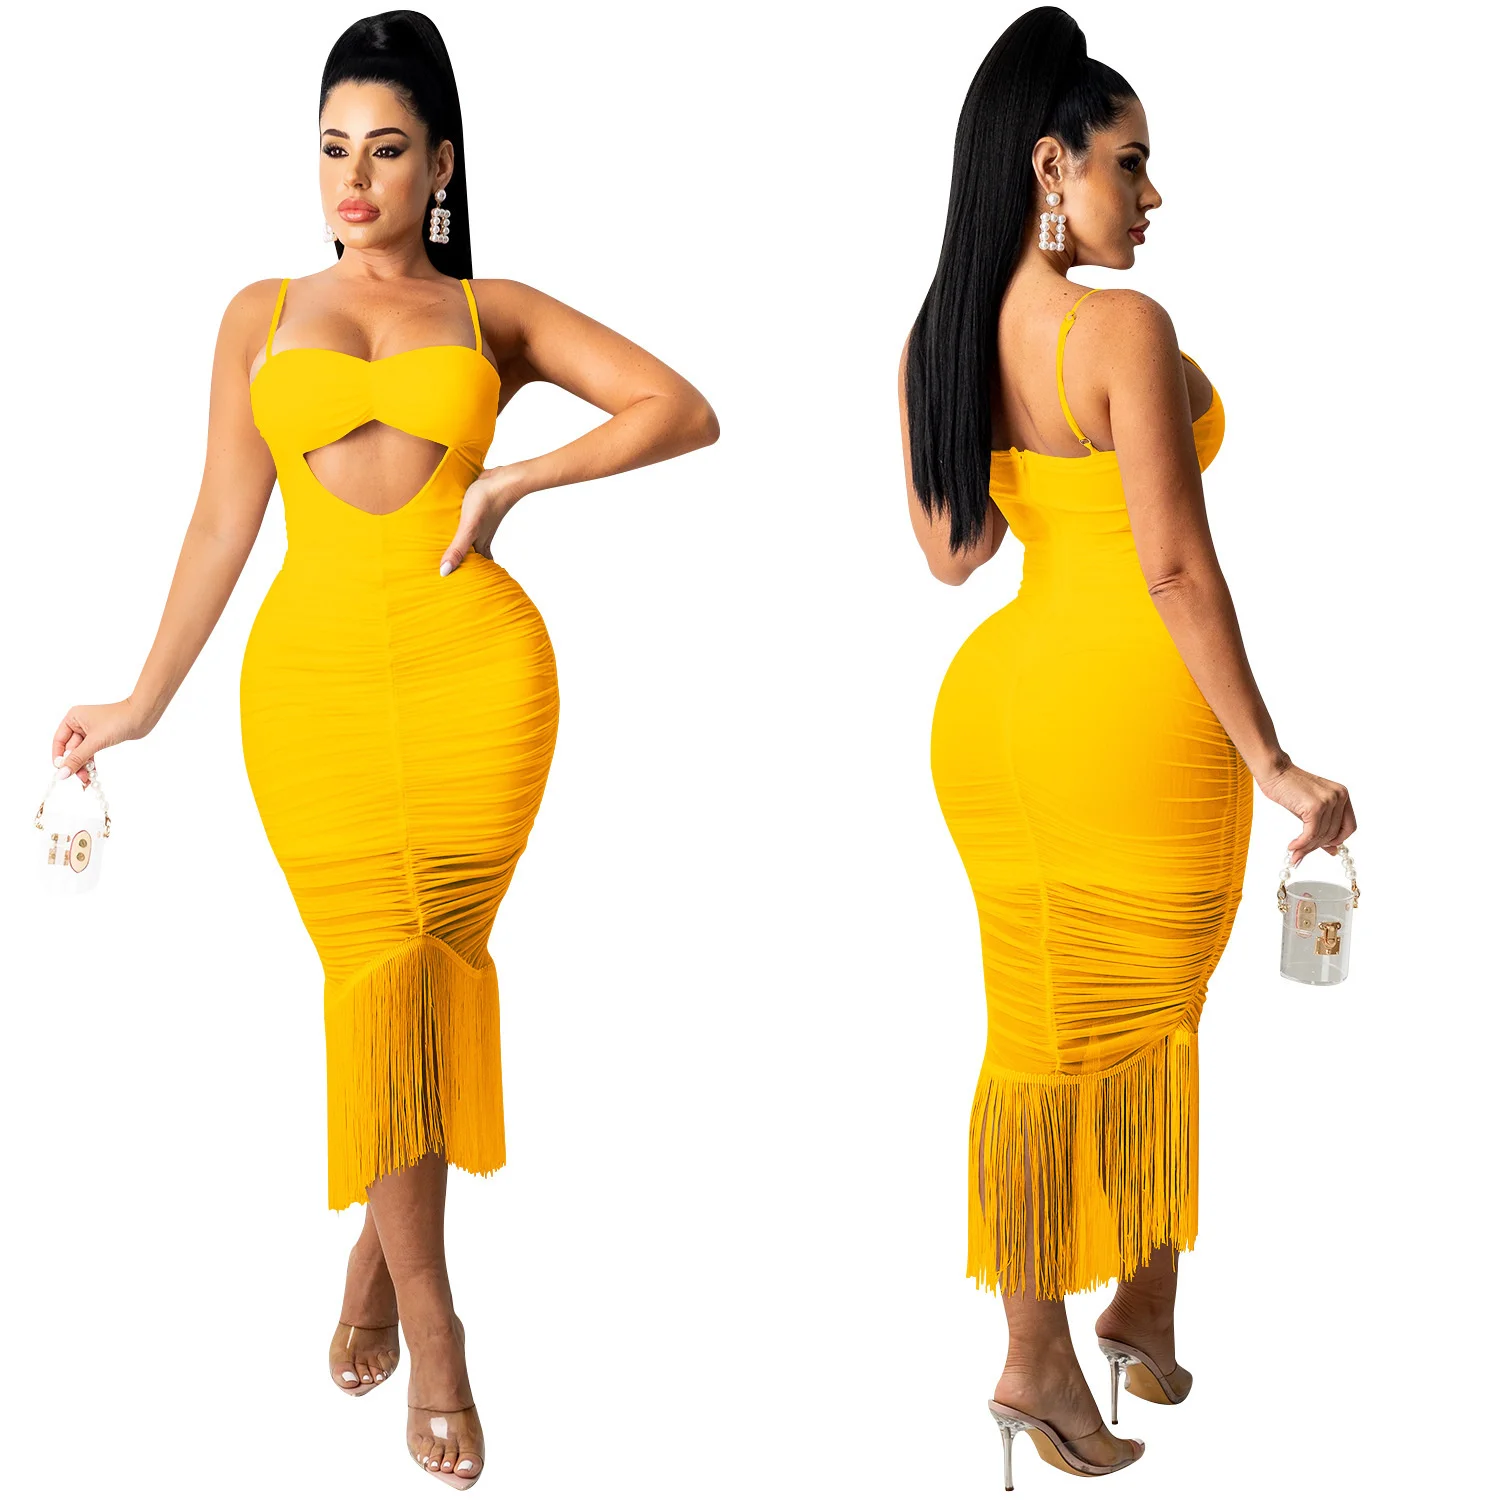 Cutubly Hollow Out Tassel Midi Dresses Solid Party Dresses For Women Casual Sexy Summer Fashion Spaghetti Straps Club Dress